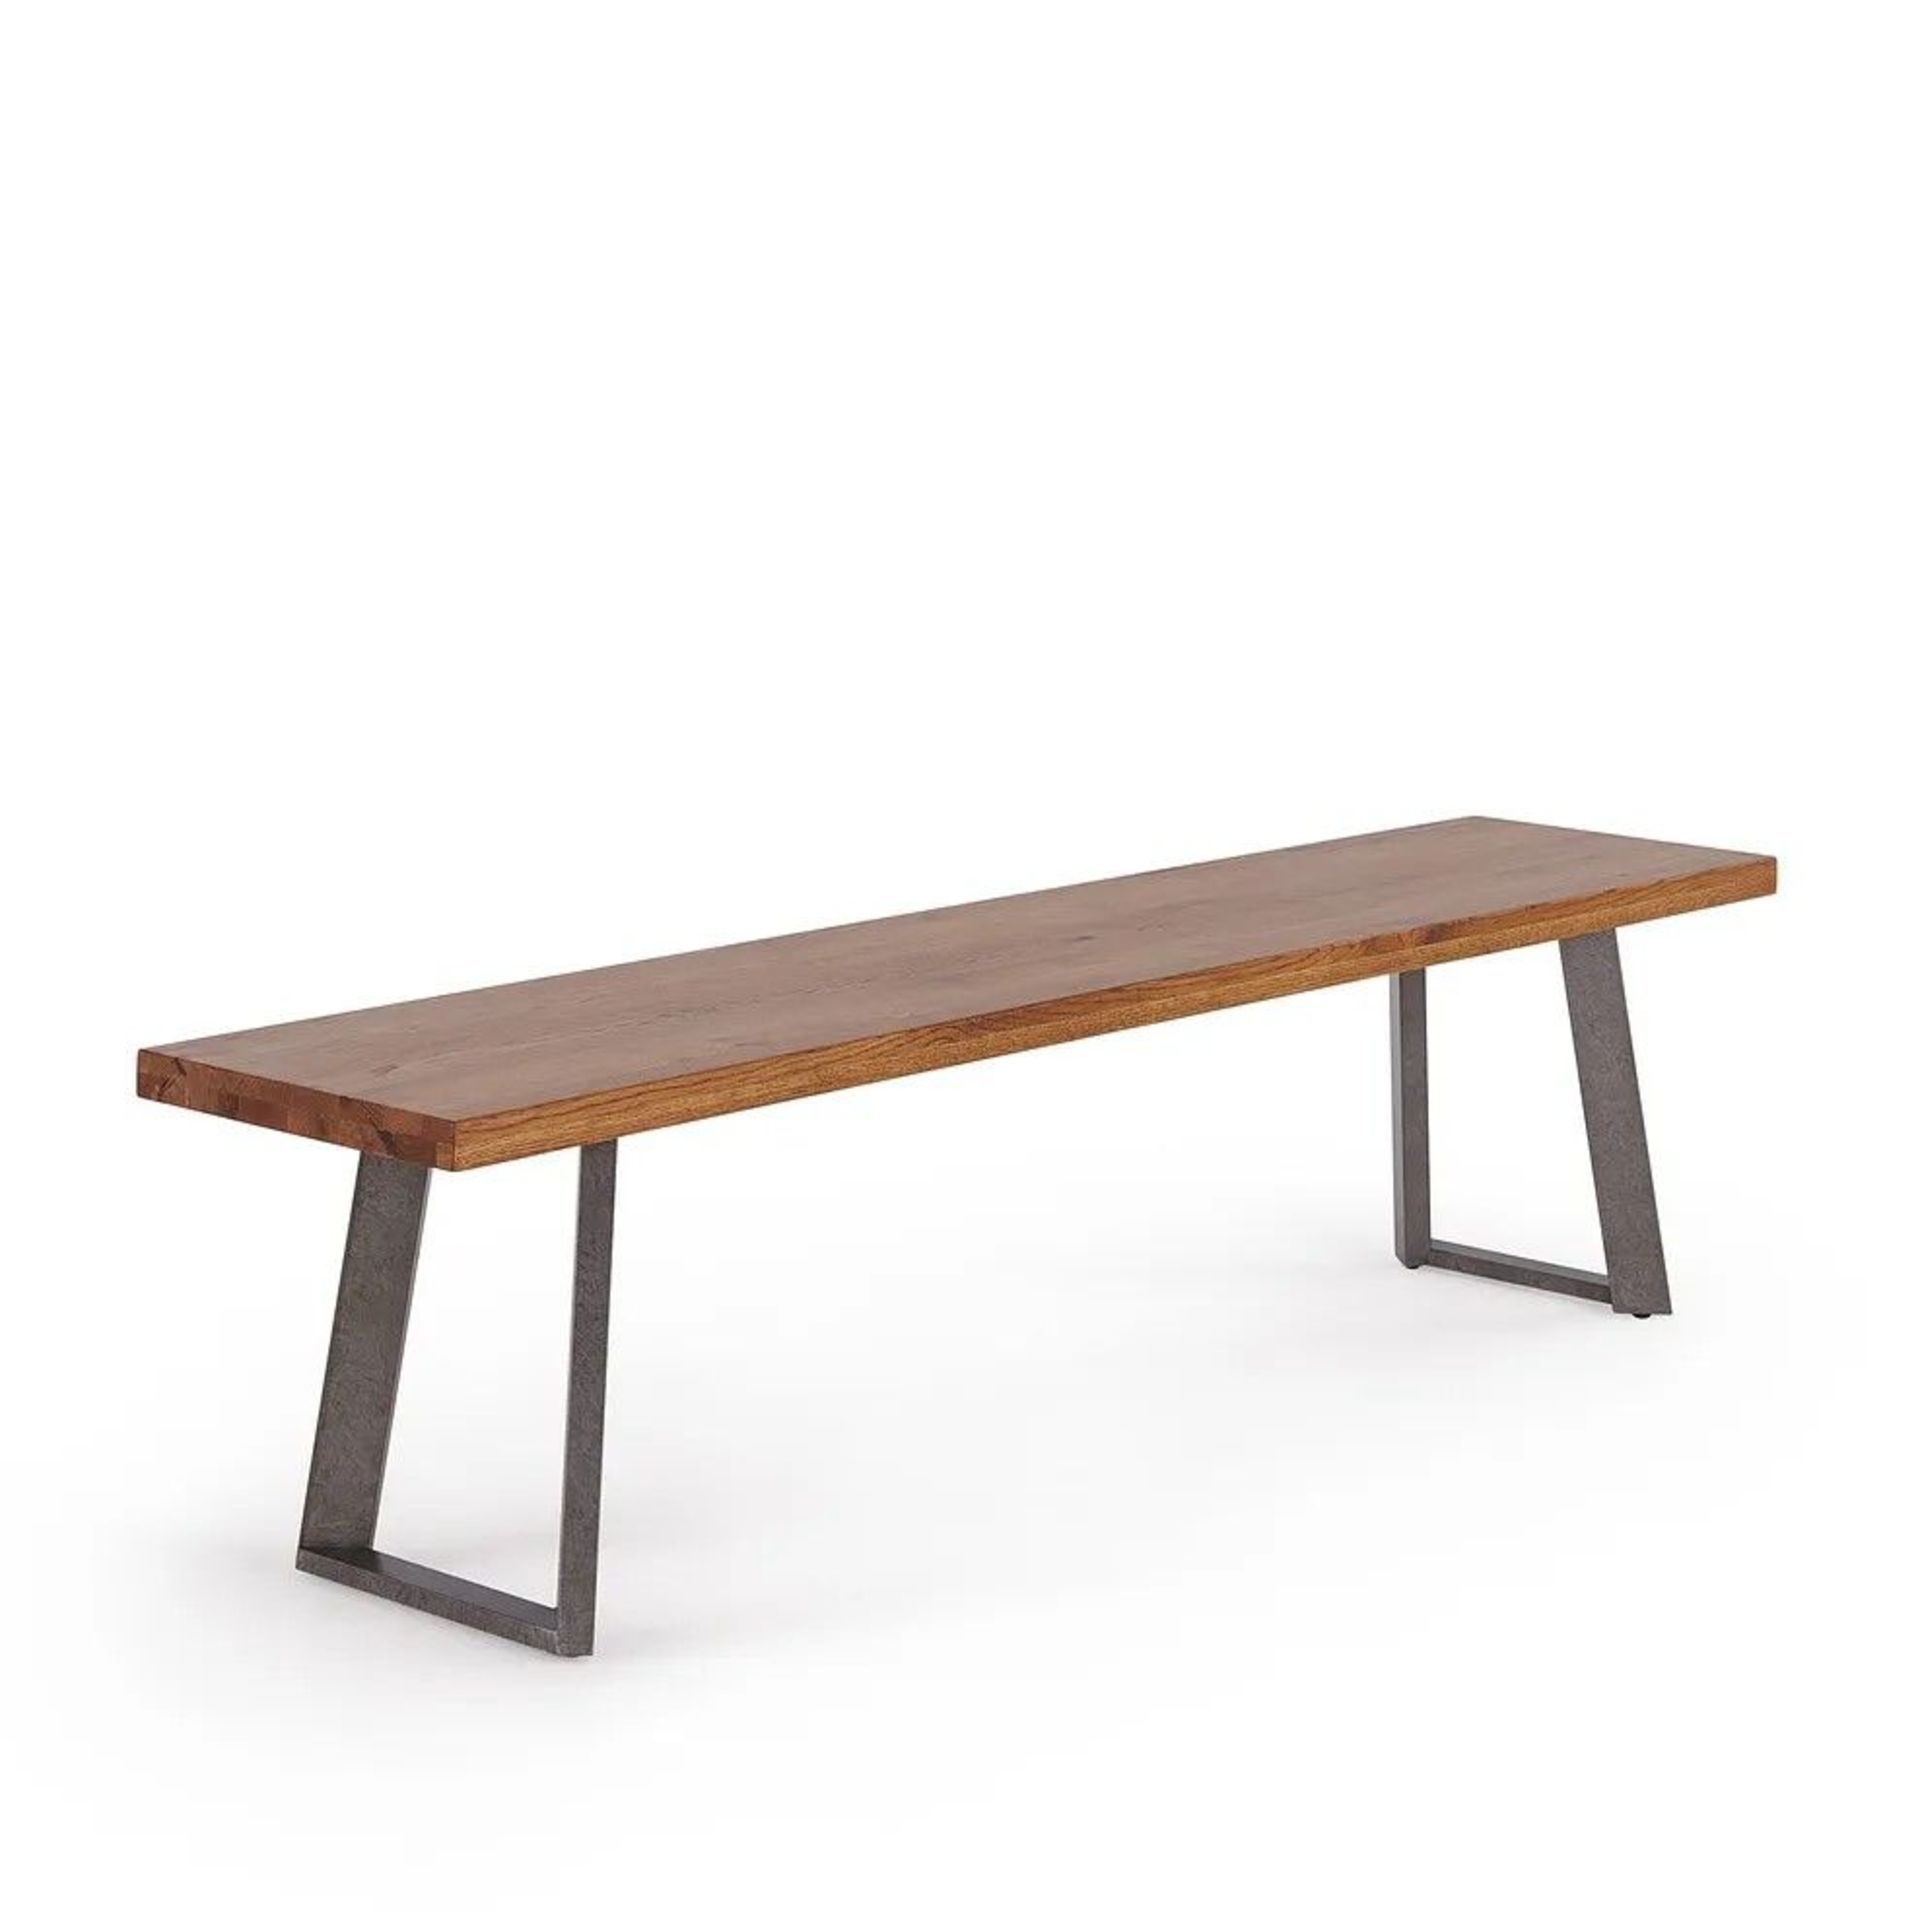 4 X New Boxed - Cantilever Rustic Solid Oak & Metal Bench. 180cm Long. RRP £330 EACH, TOTAL LOT - Image 2 of 2